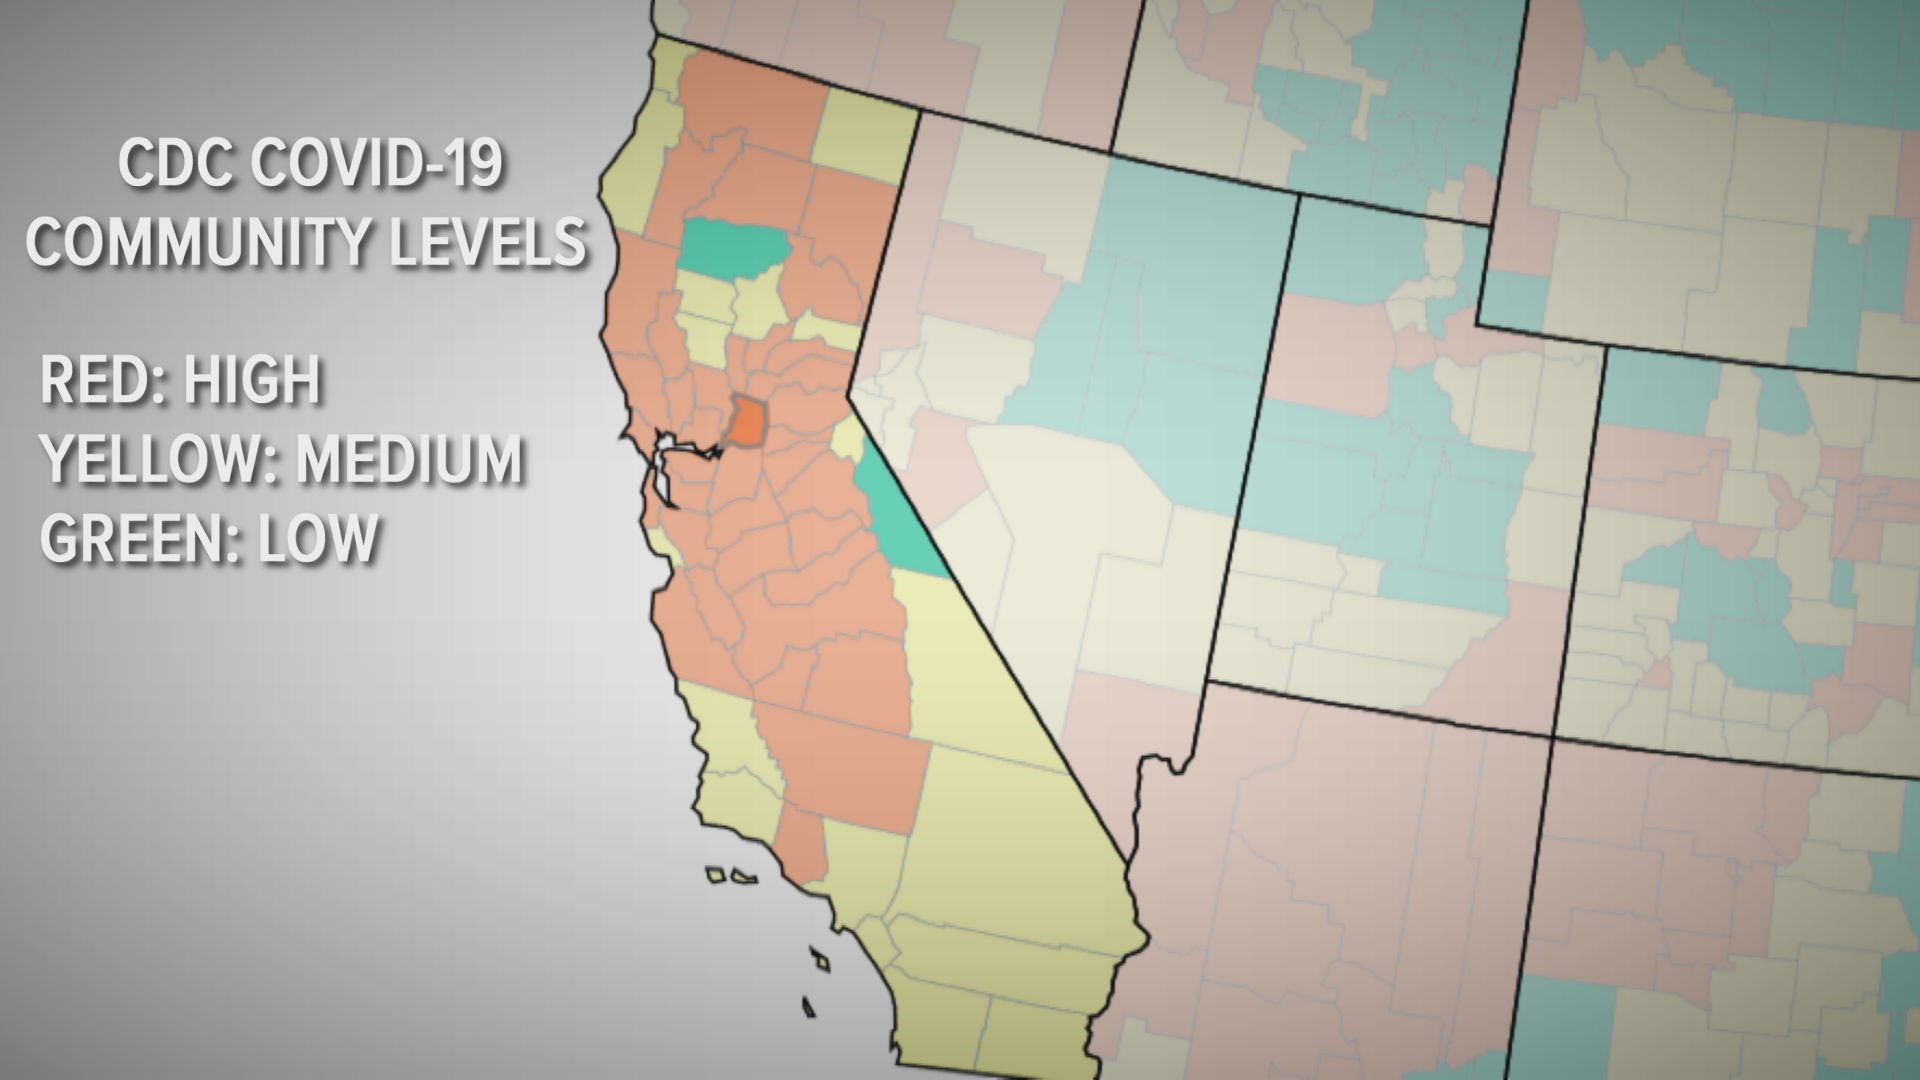 Case and hospitalization rates in Sacramento County and across most of the state appear to be leveling off, according to California public health data.